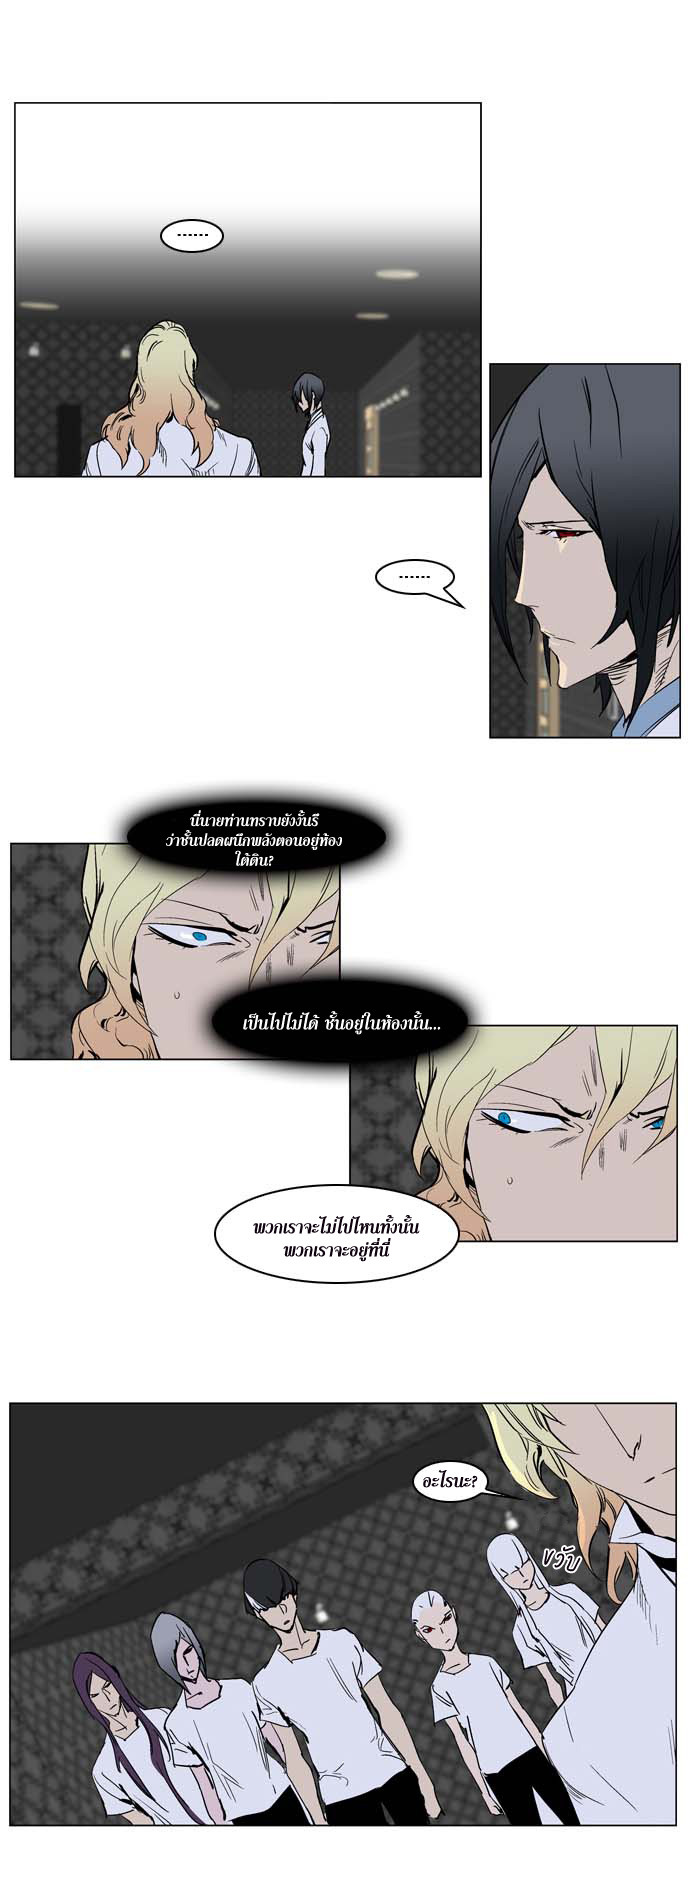 Noblesse 237 011